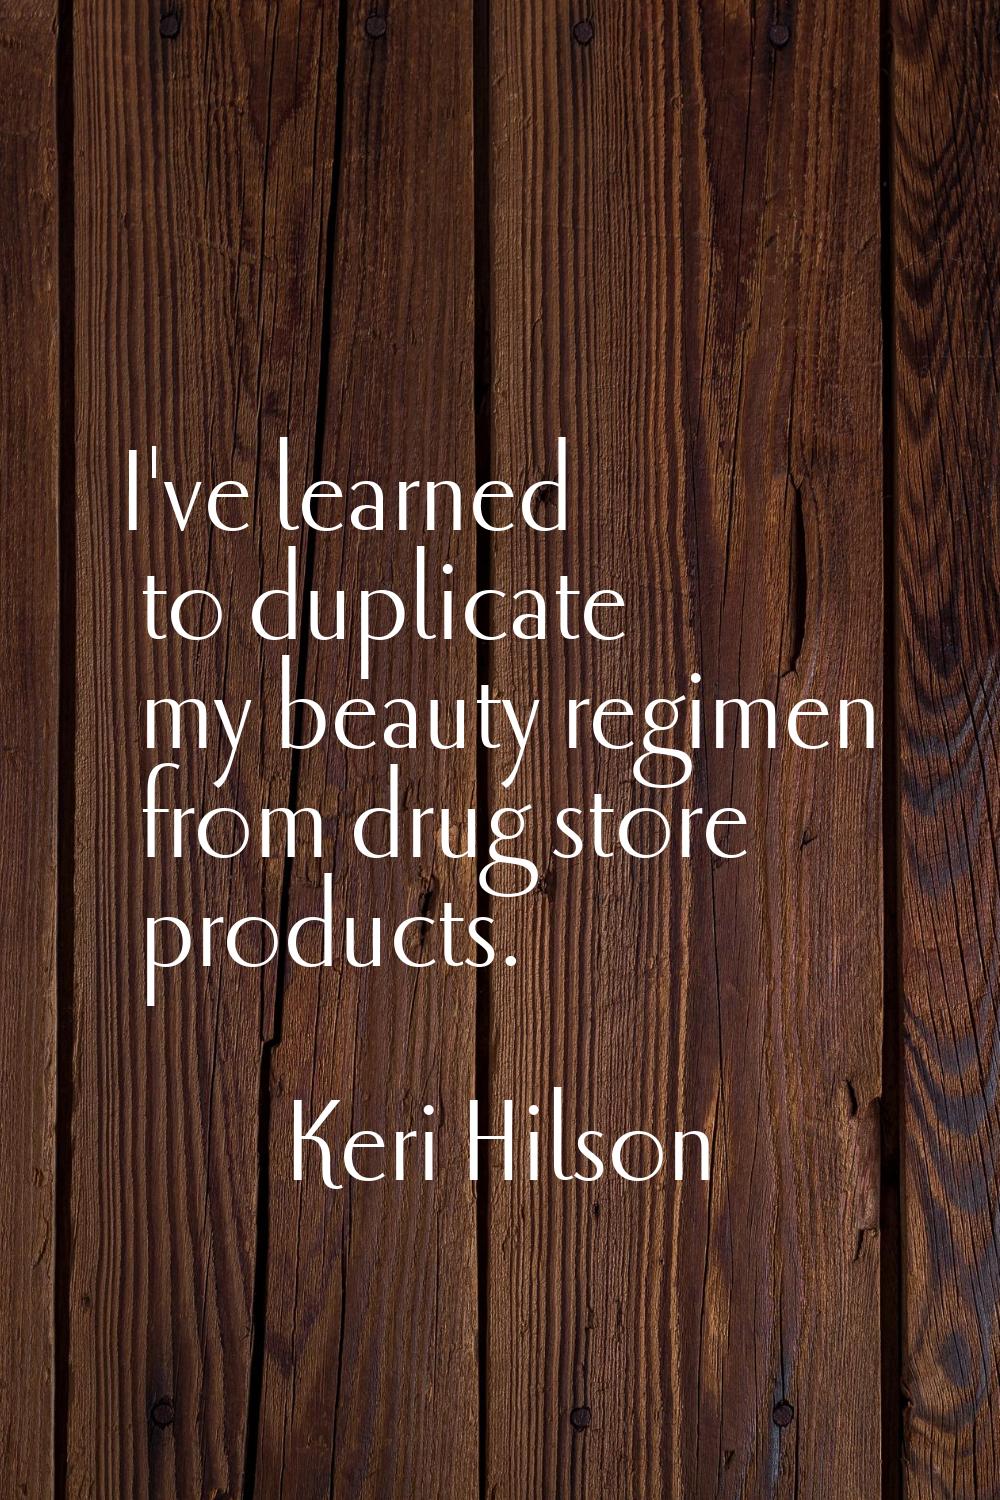 I've learned to duplicate my beauty regimen from drug store products.